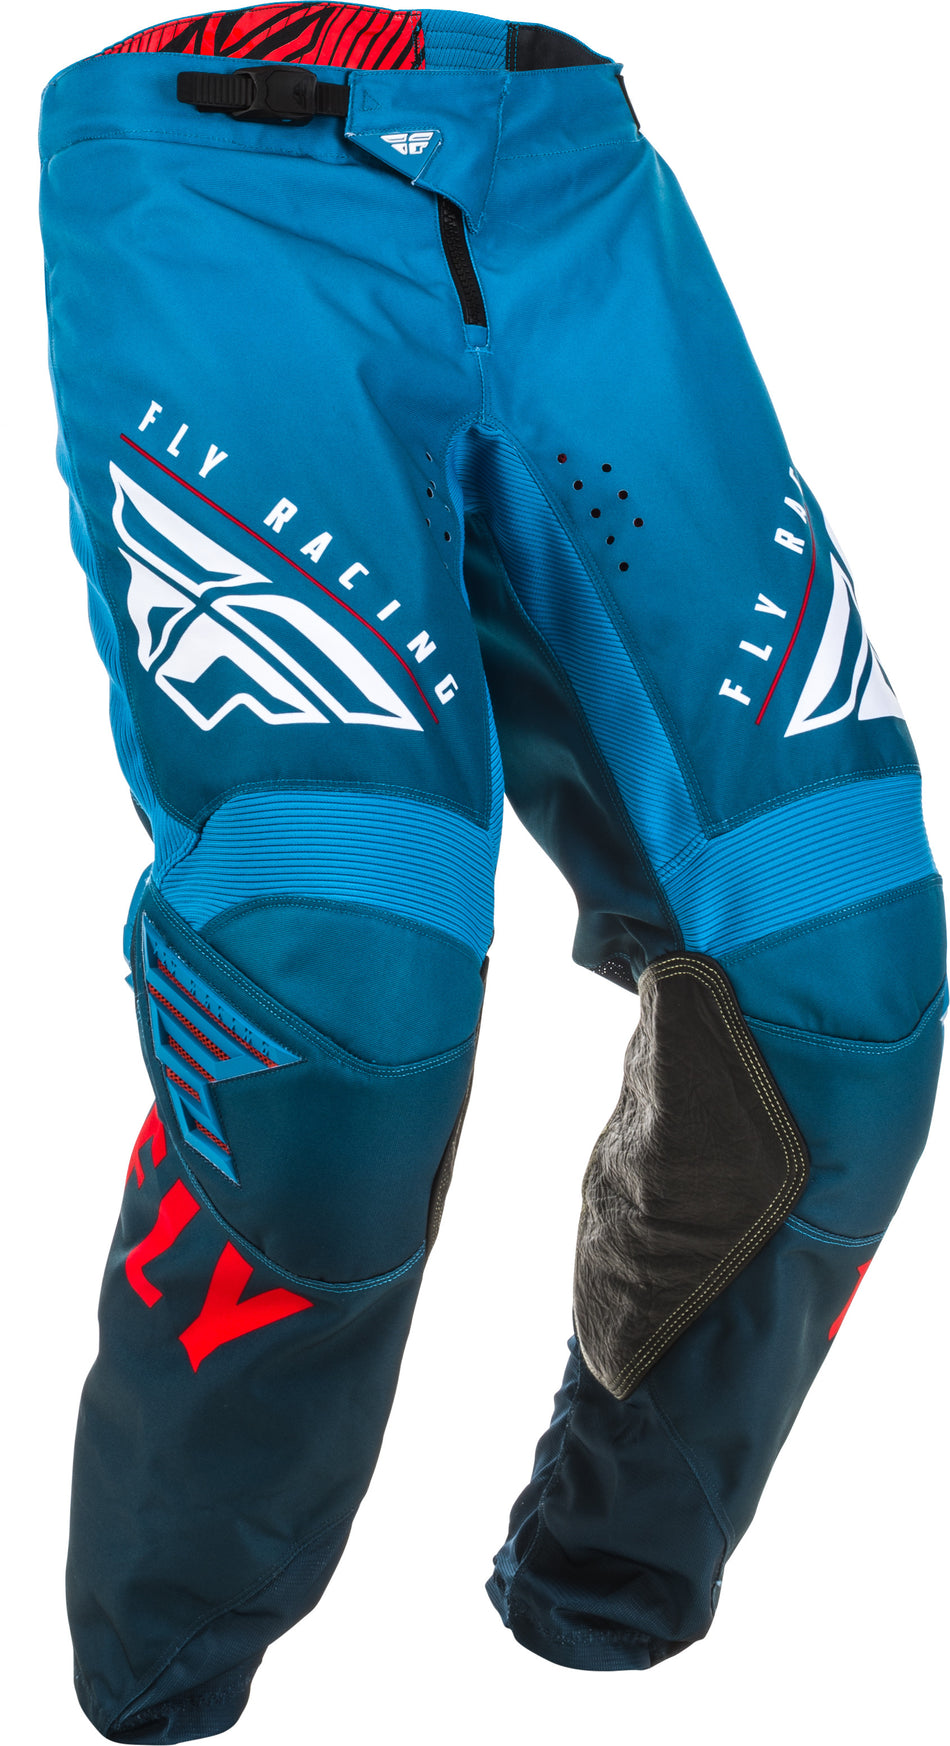 FLY RACING Kinetic K220 Pants Blue/White/Red Sz 32 373-53132